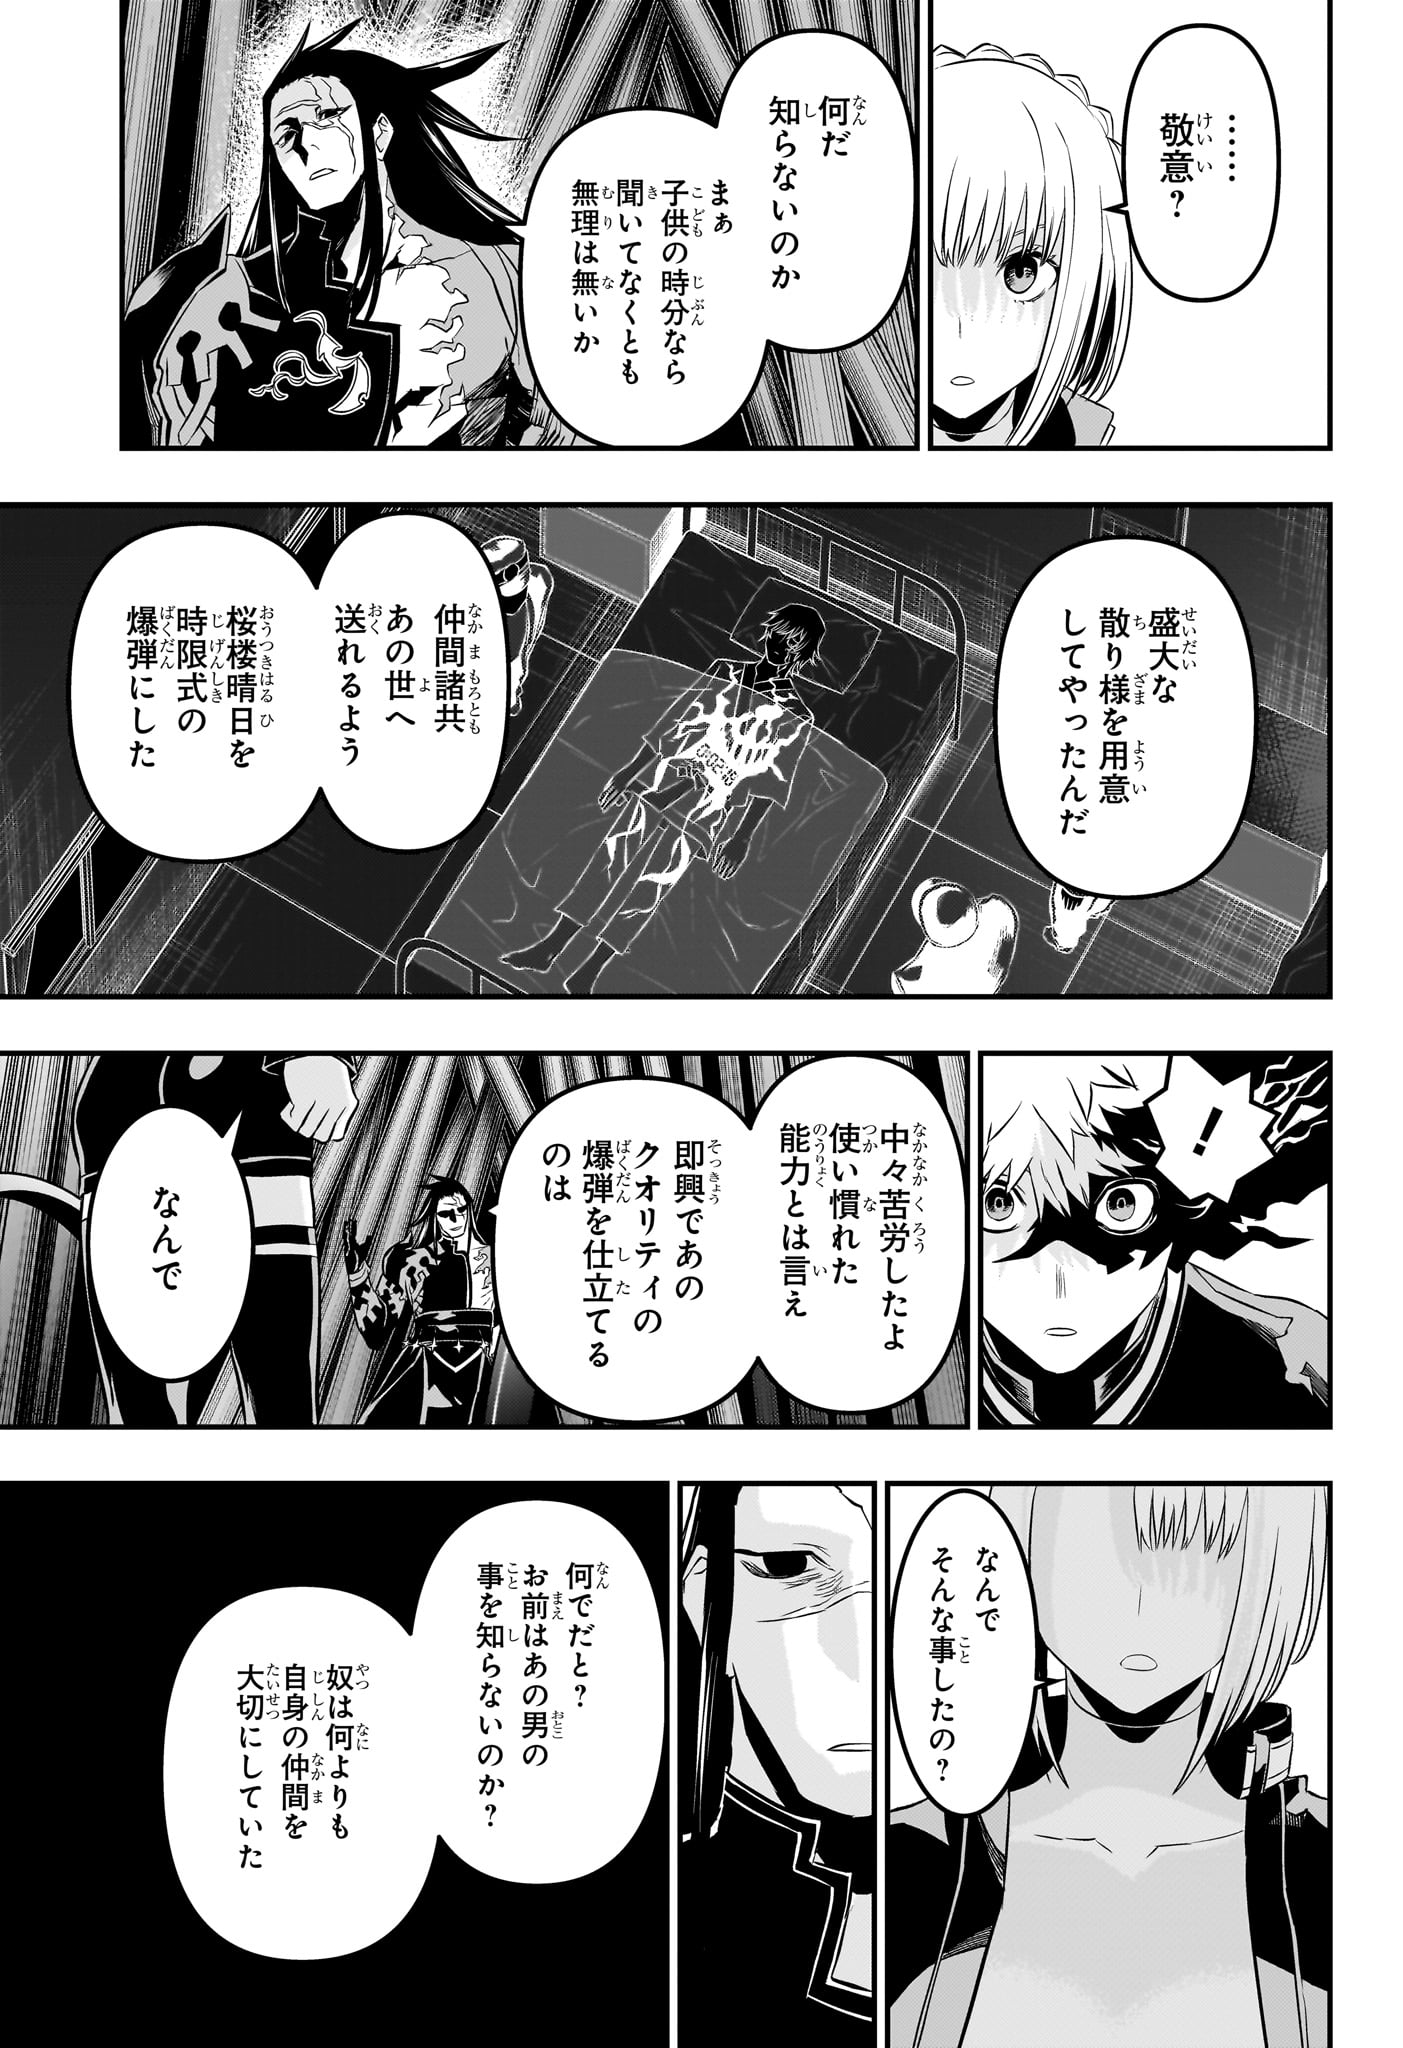 Nue no Onmyouji - Chapter 52 - Page 3